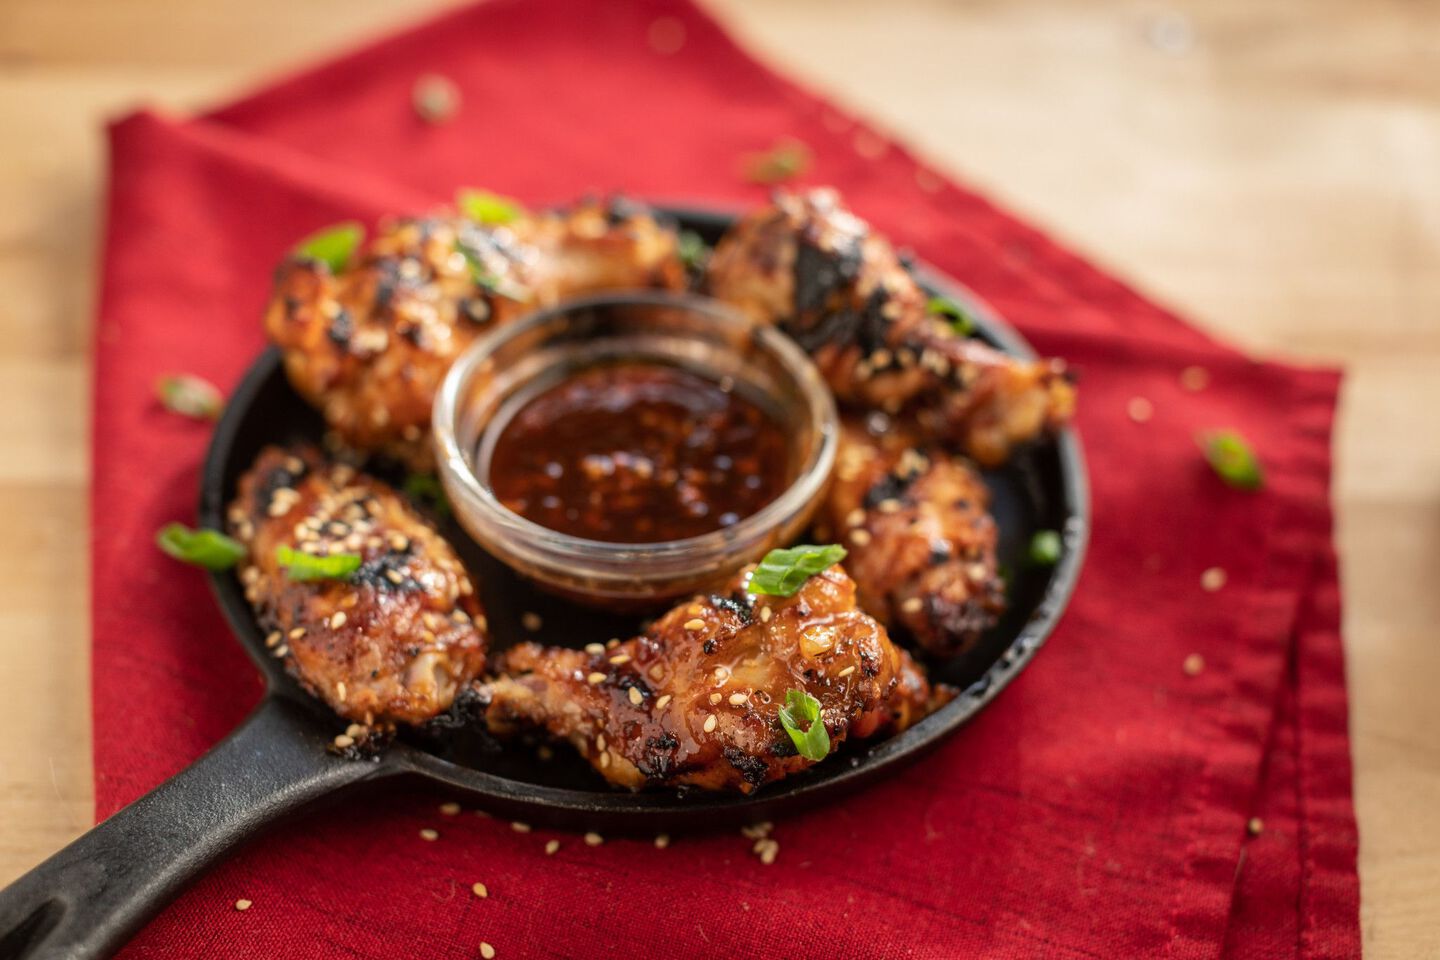 Stephen's Spicy Asian Wings